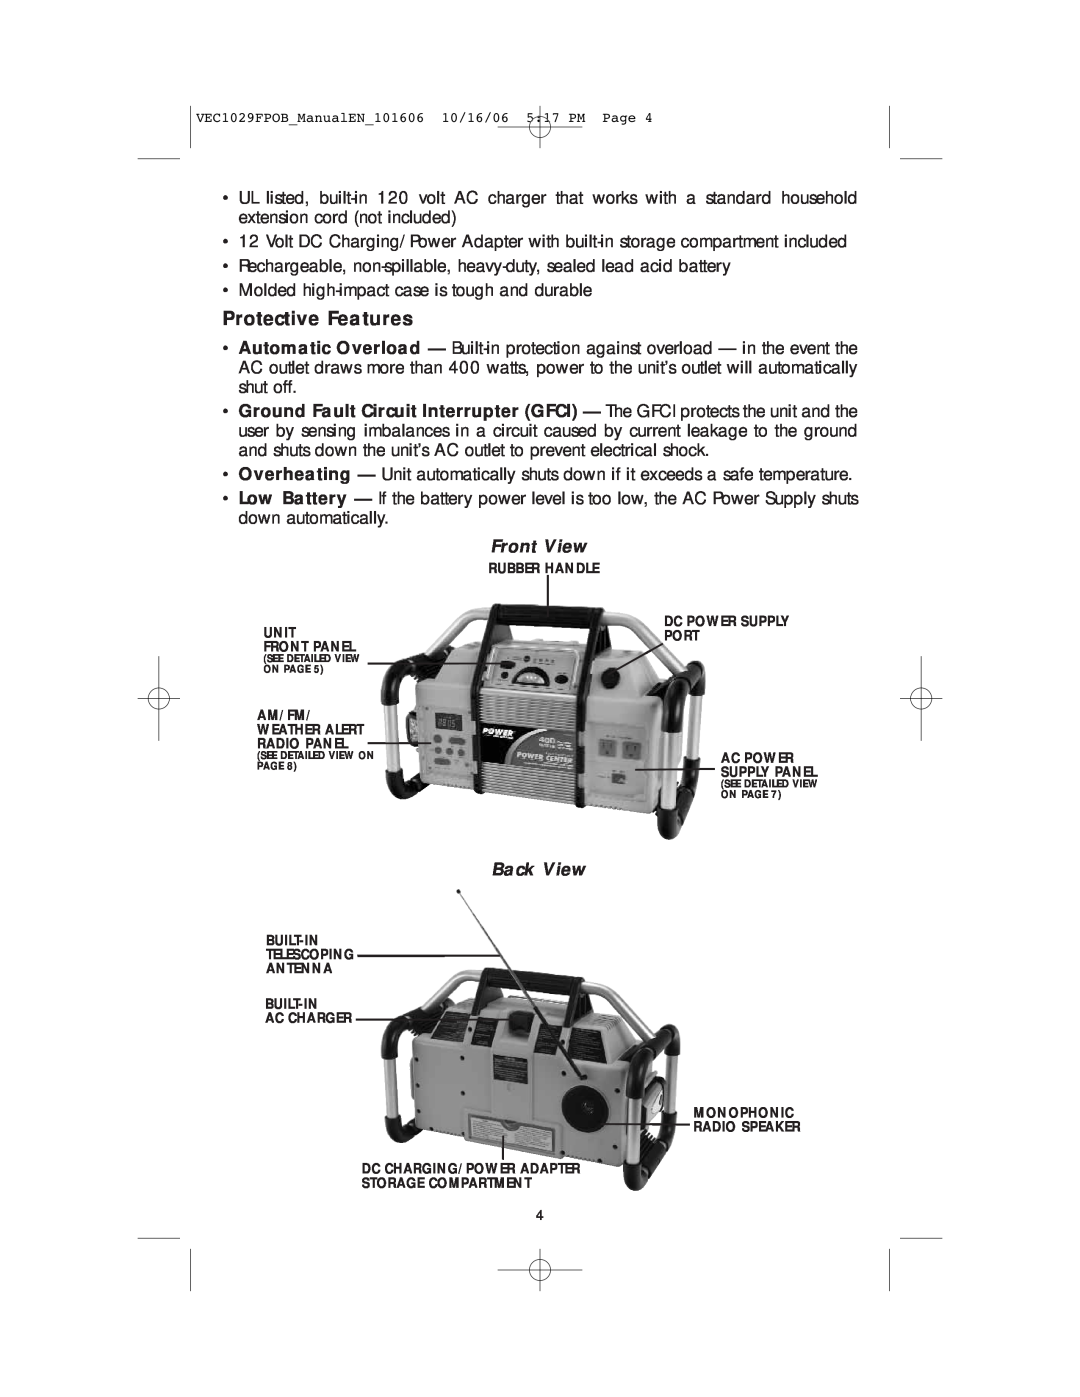 Energy Tech Laboratories VEC1029FPOB user manual Protective Features, Front View, Back View 